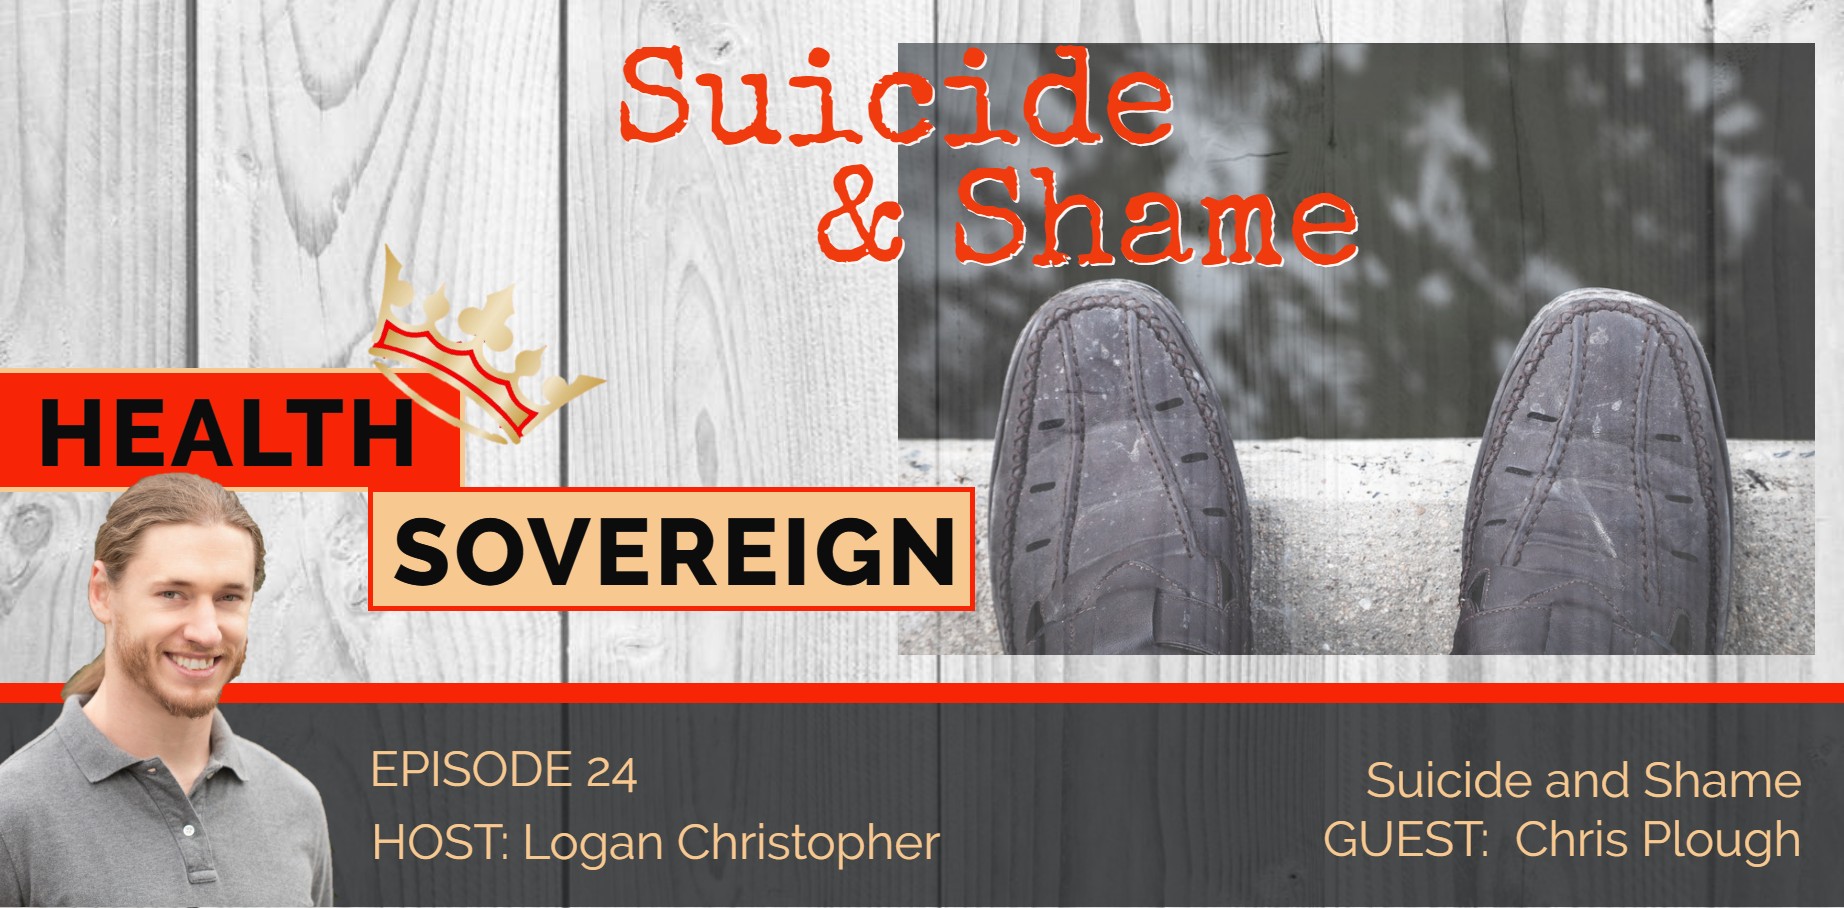 Episode 24: Suicide & Shame with Chris Plough